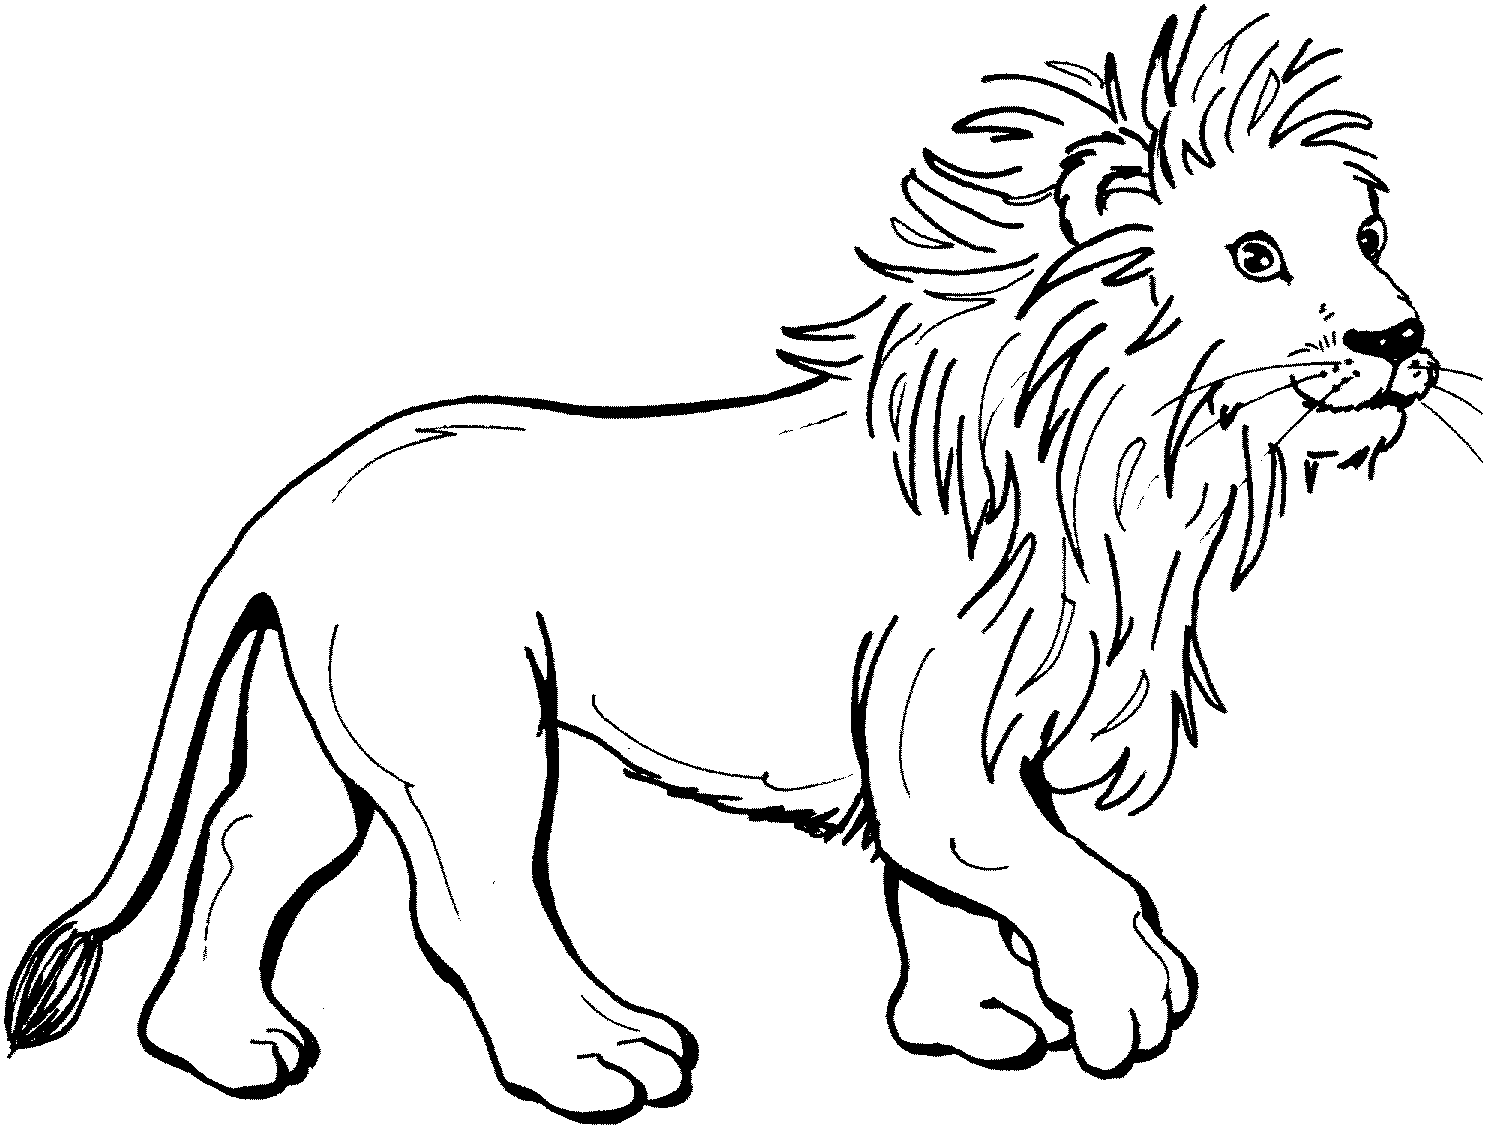 About Lions